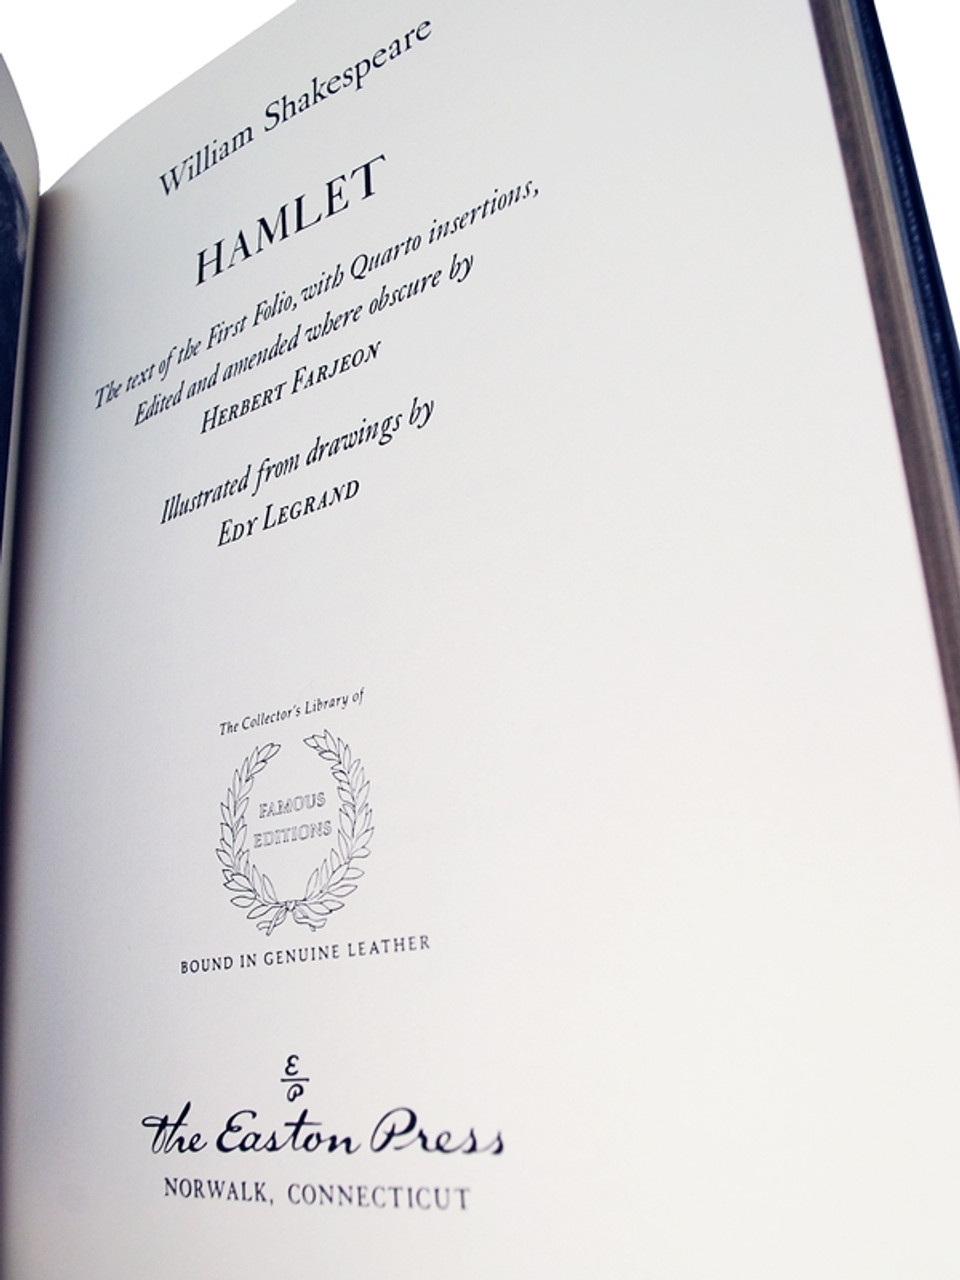 William Shakespeare "Hamlet" Leather Bound Collector's Edition